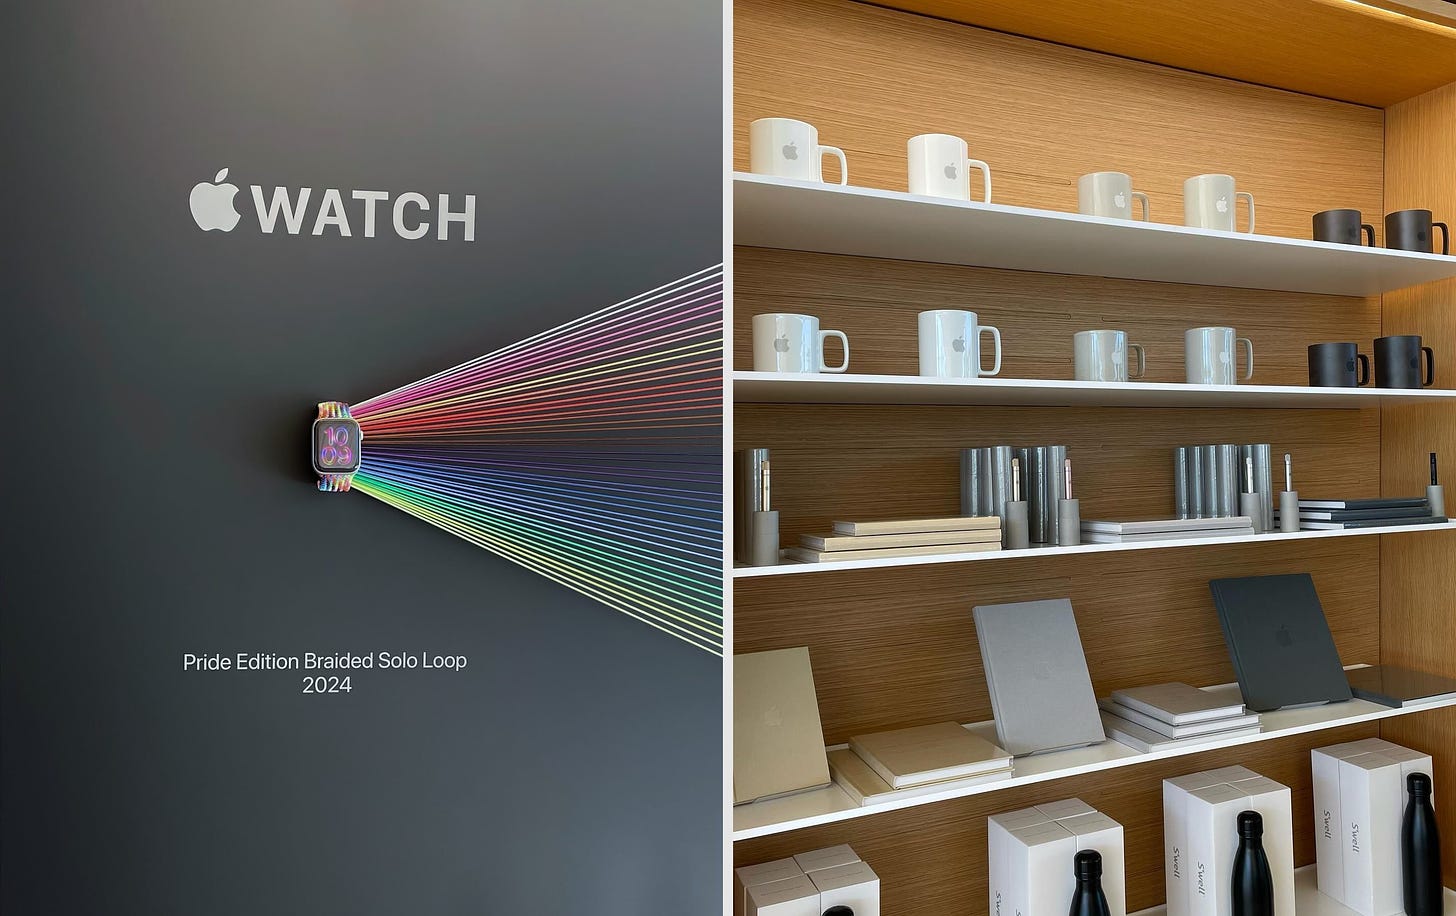 Two Avenue bays at Apple Park Visitor Center. The left bay displays the Pride Edition Braided Solo Loop. The right bay displays merchandise once offered at Apple Infinite Loop.